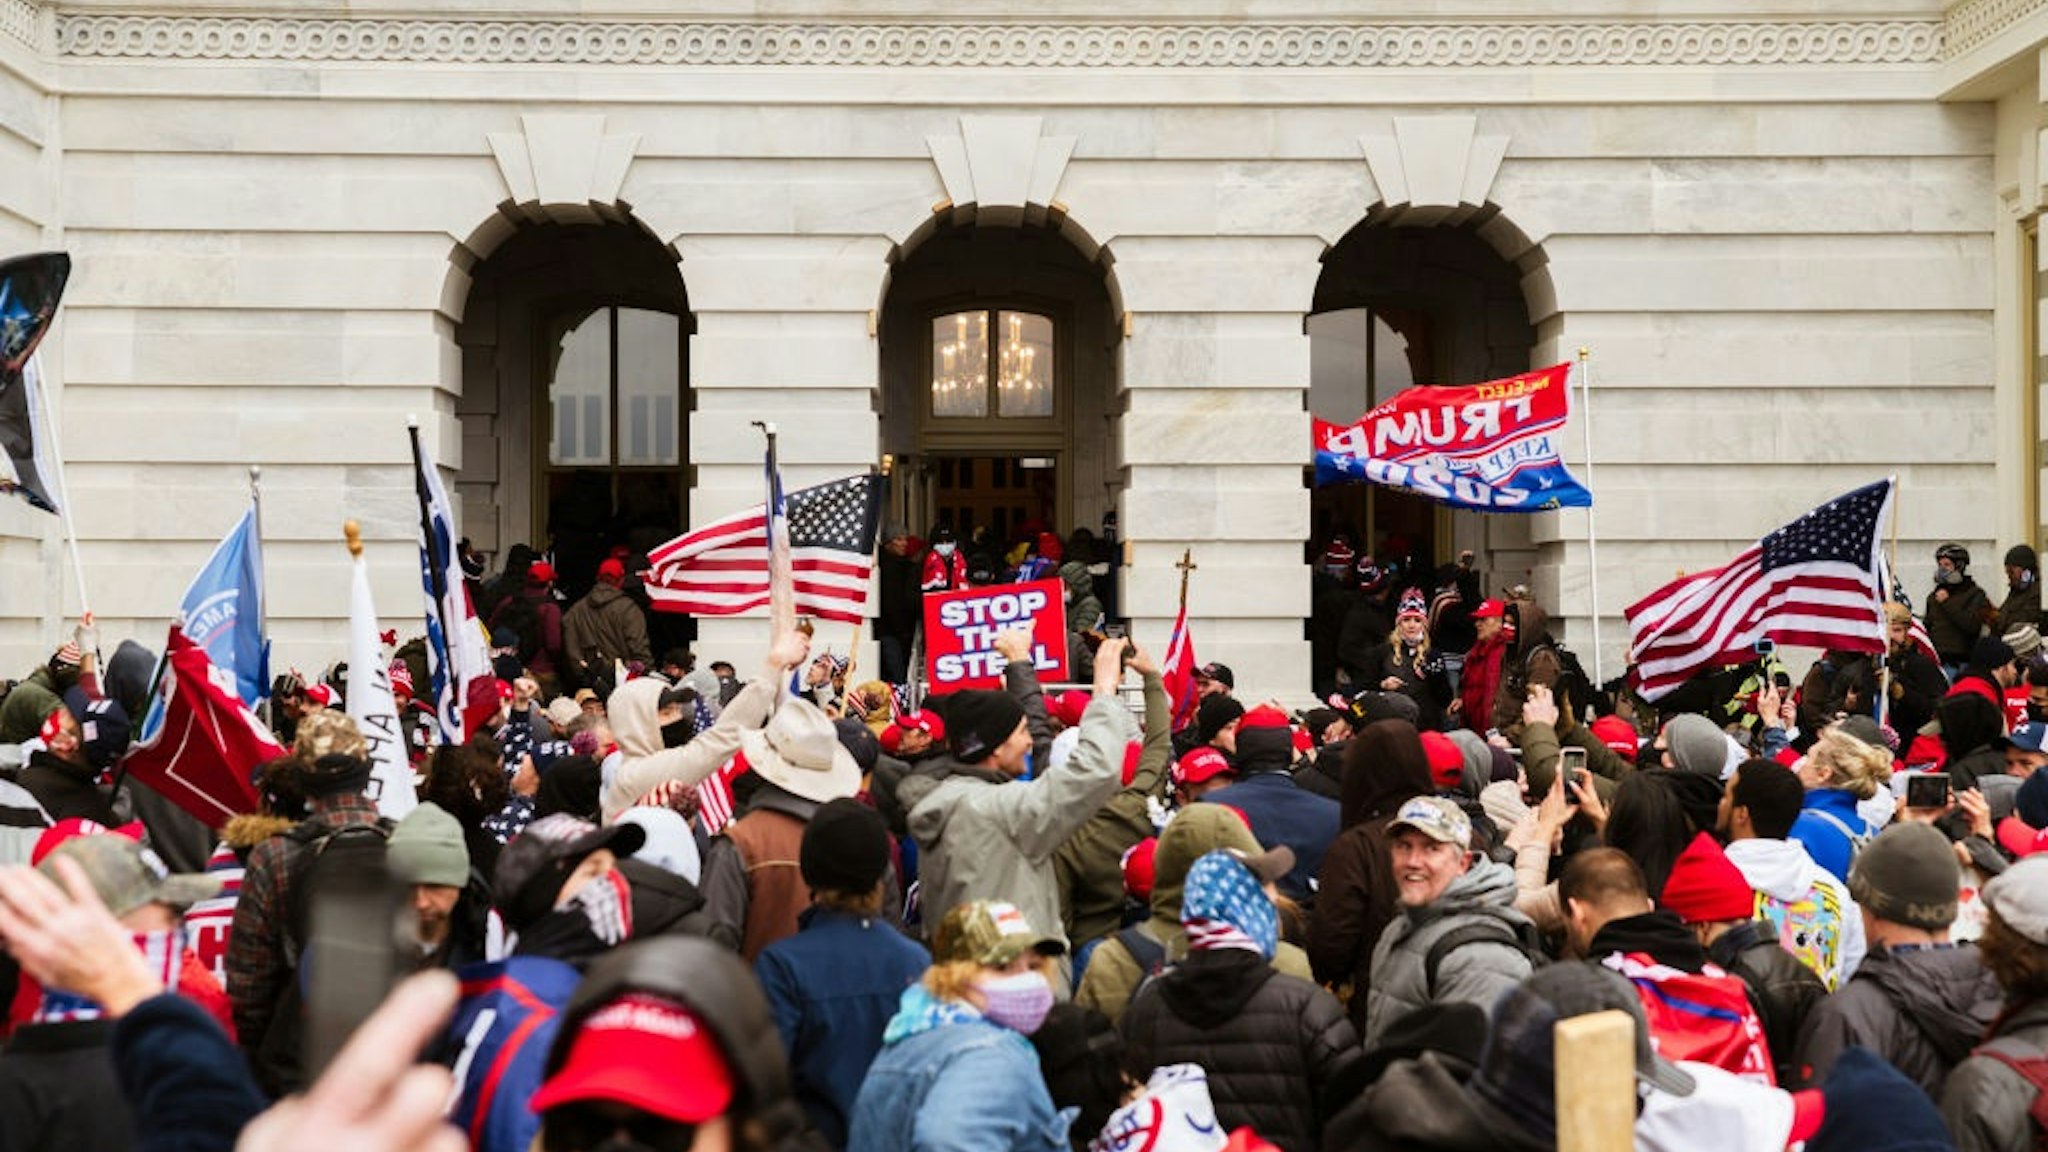 WASHINGTON, DC - JANUARY 06: A pro-Trump mob floods into the Capitol Building after breaking into it on January 6, 2021 in Washington, DC.